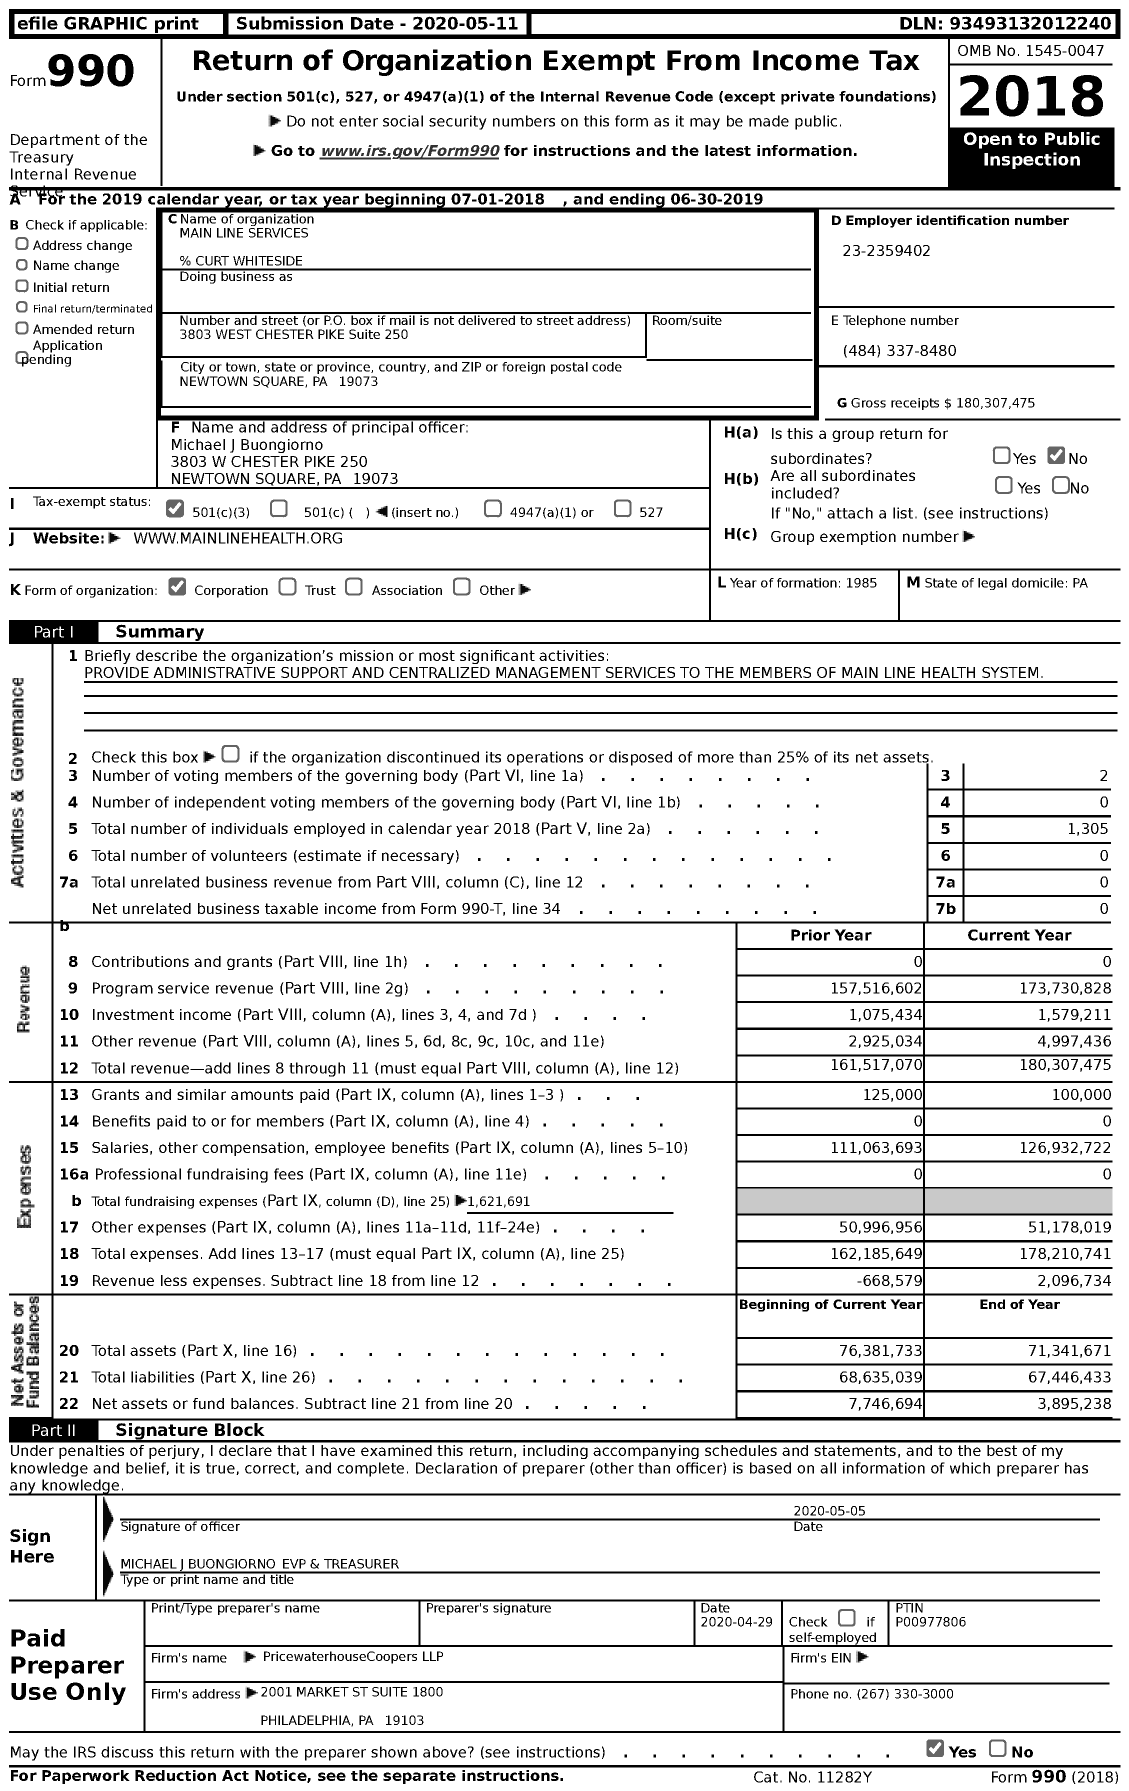 Image of first page of 2018 Form 990 for Main Line HealthCare (MLHC)